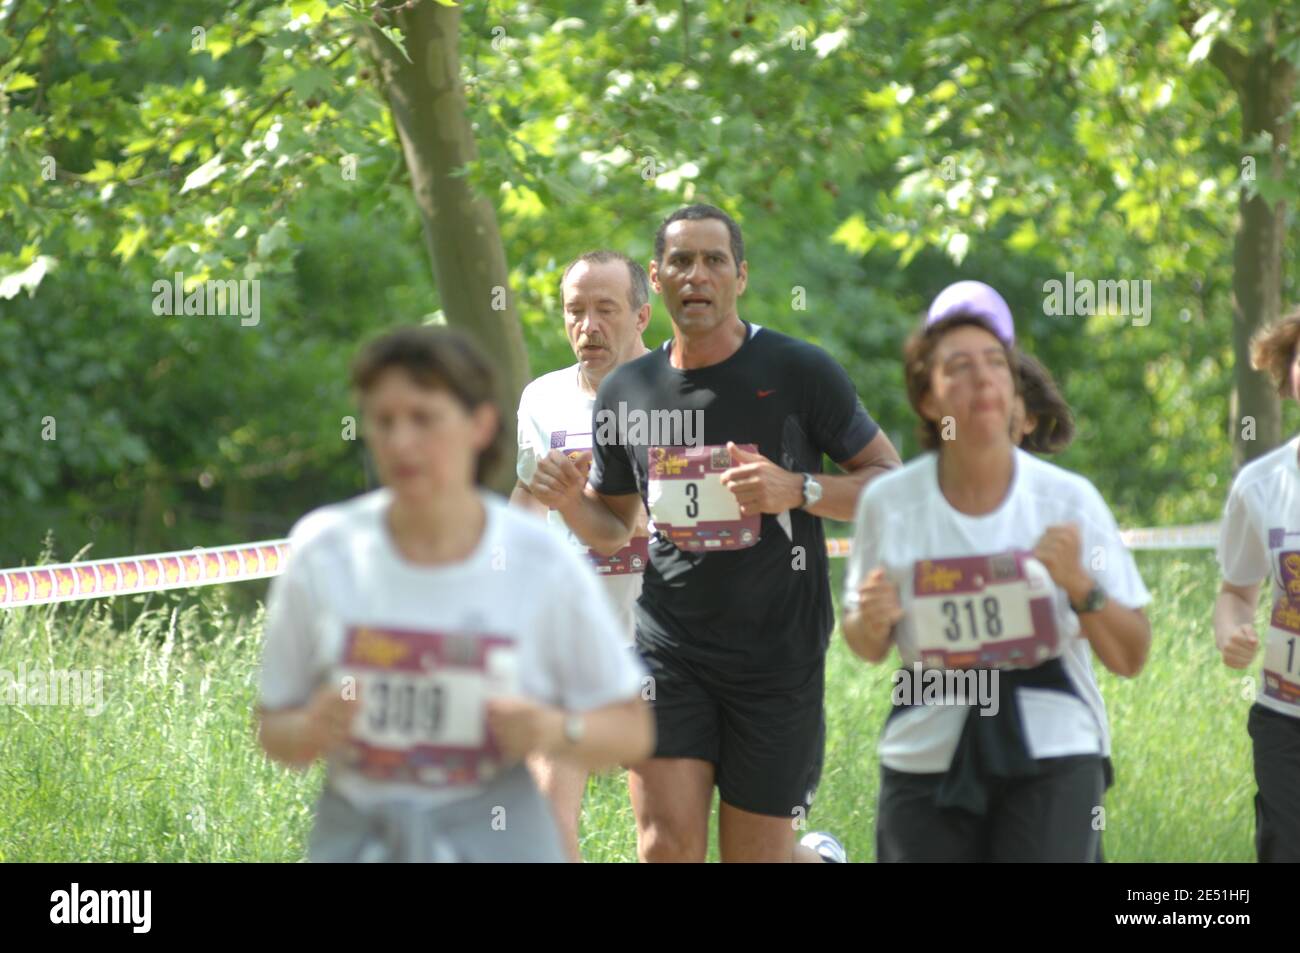 French former basket player Richard Dacoury during the 'les boucles d'or'  marathon for the association '1000 femmes, 1000 vies' which wrestled for  the cancer of the cervix prevention in the Vincennes park